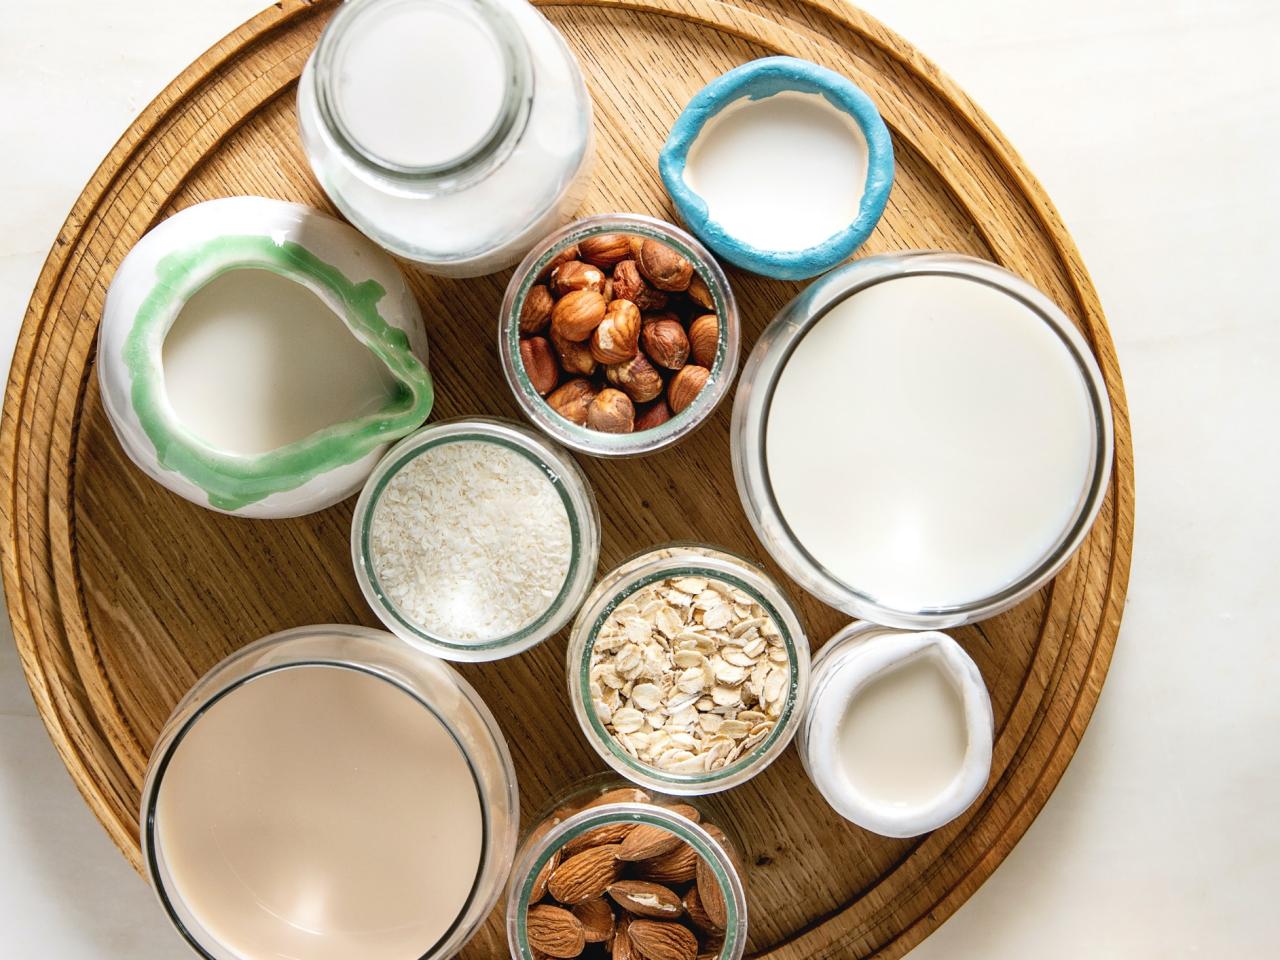 How to Make Nut Milk  The Ultimate Guide - From My Bowl